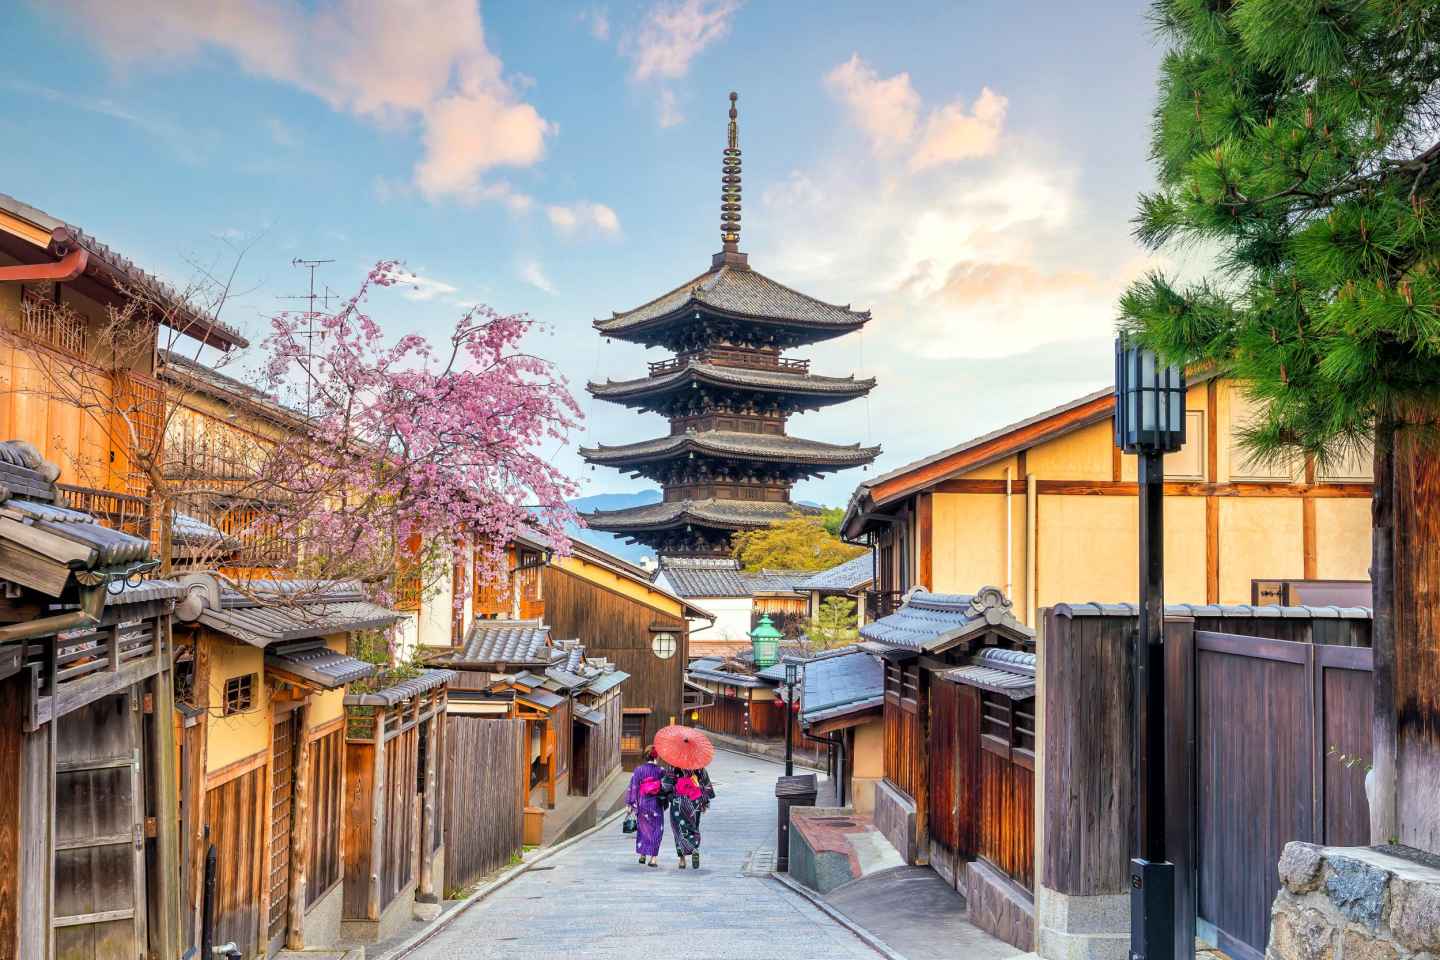 Stylish.ae Uncovers: Sipping Sake In Kyotos Ancient Streets.